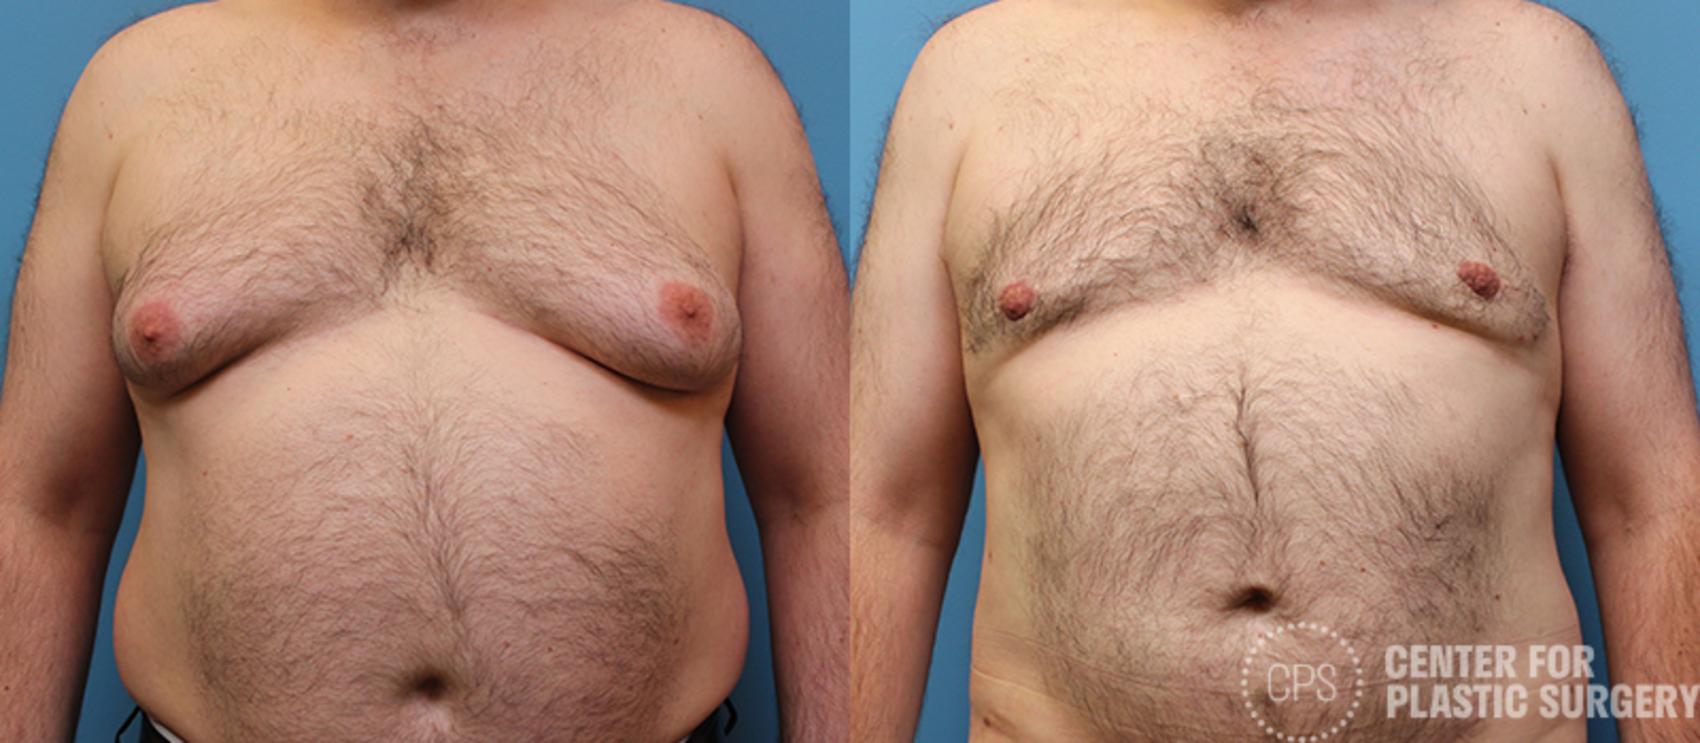 Male Breast Reduction / Gynecomastia Case 142 Before & After Front | Chevy Chase & Annandale, Washington D.C. Metropolitan Area | Center for Plastic Surgery